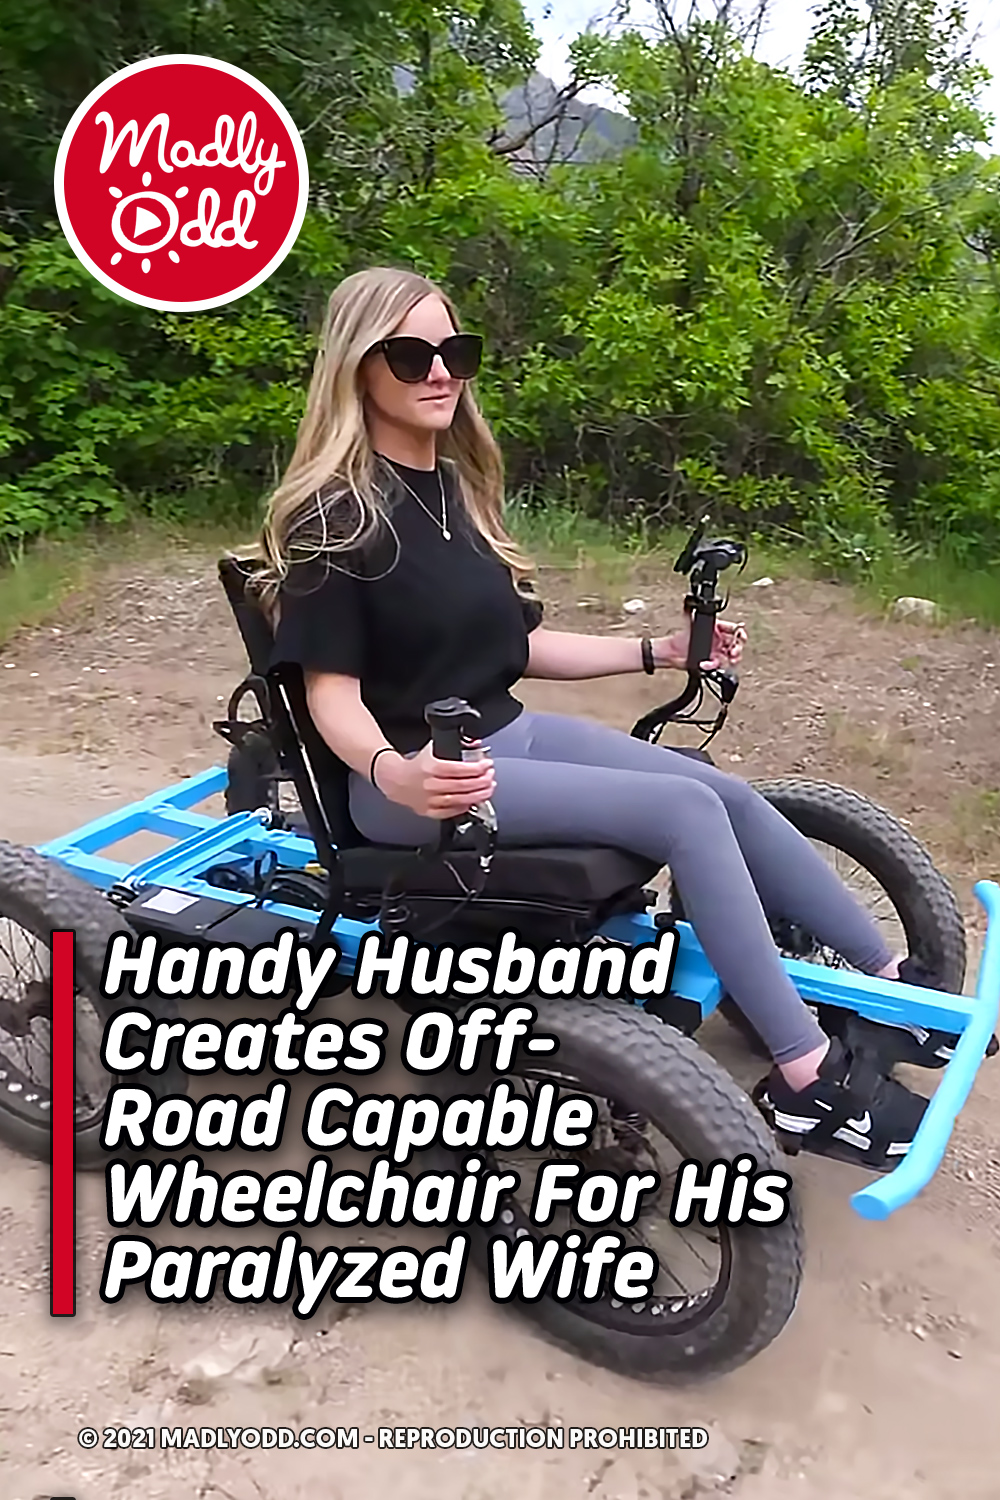 Handy Husband Creates Off-Road Capable Wheelchair For His Paralyzed Wife